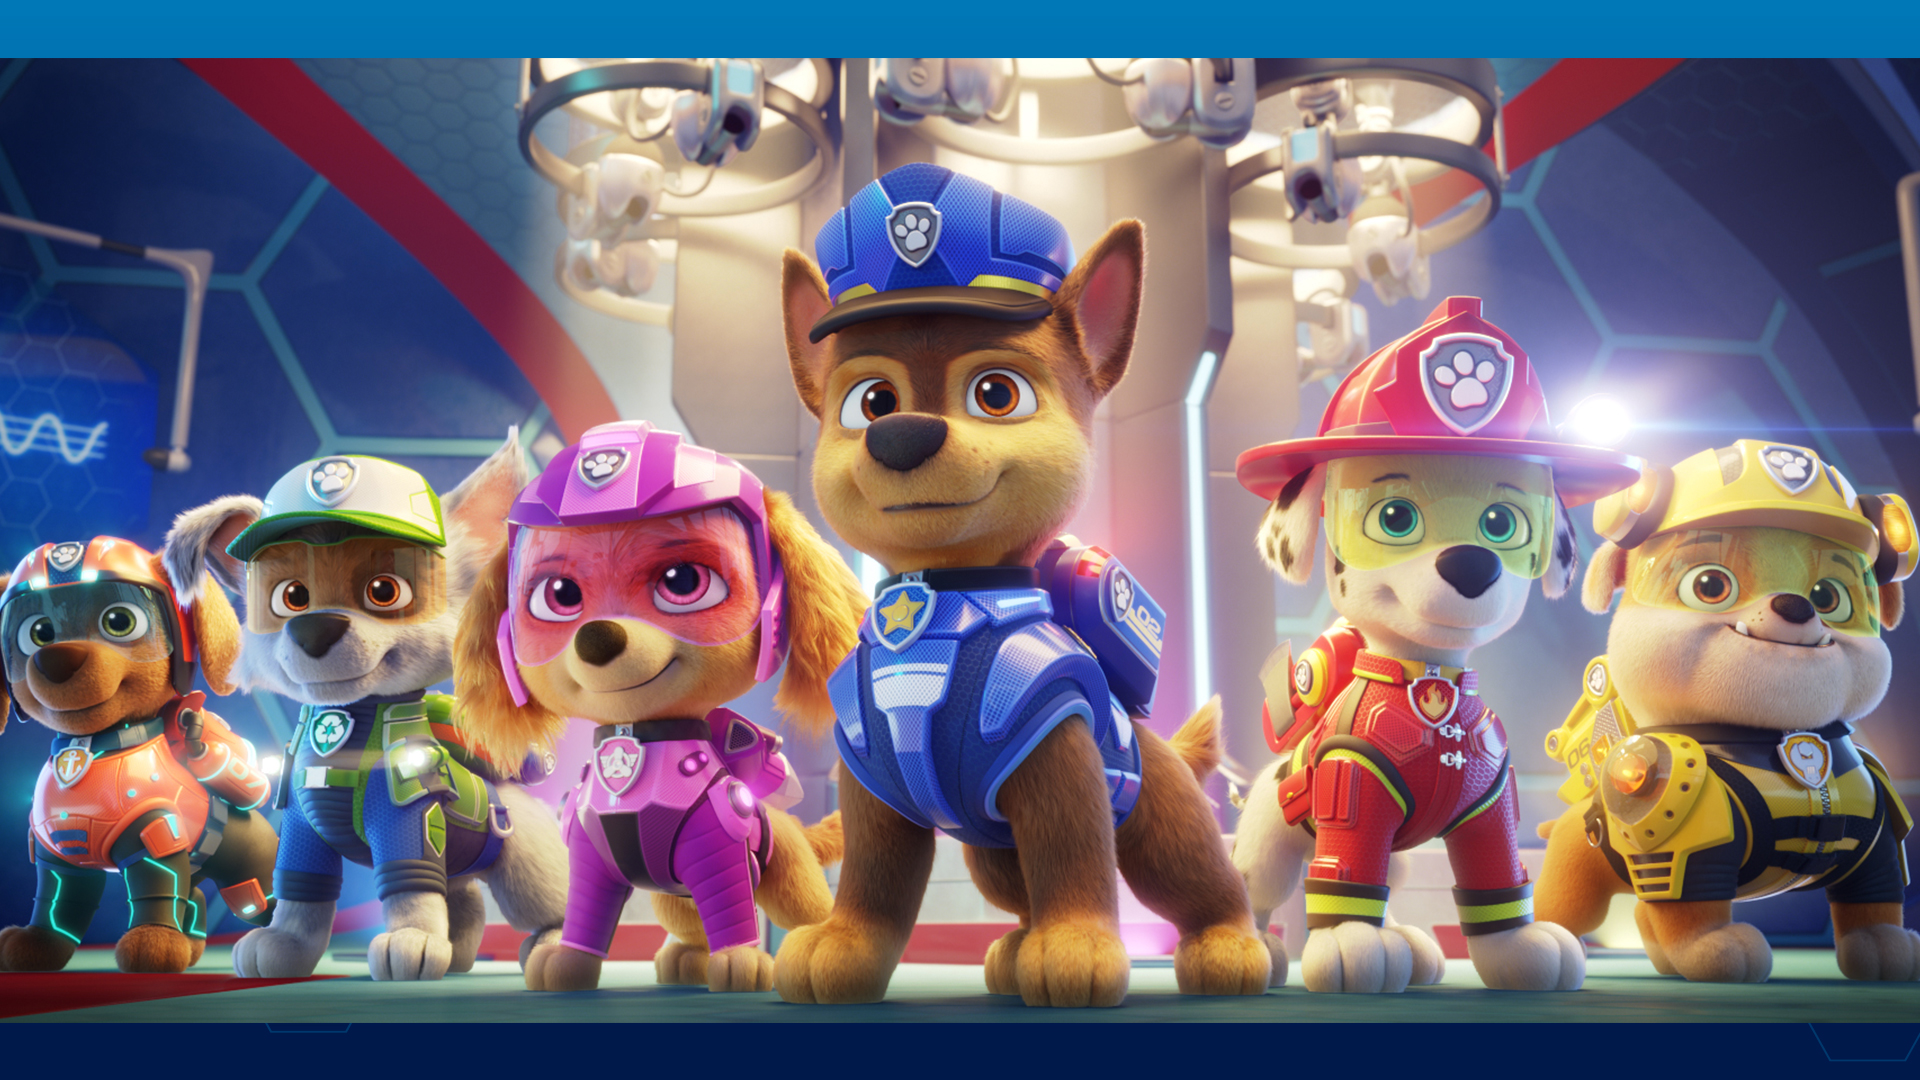 PAW Patrol pups are on a roll and ready to make their big screen debut. PAW Patrol: The Movie in theatres August 20. #PAWPatrolMovie